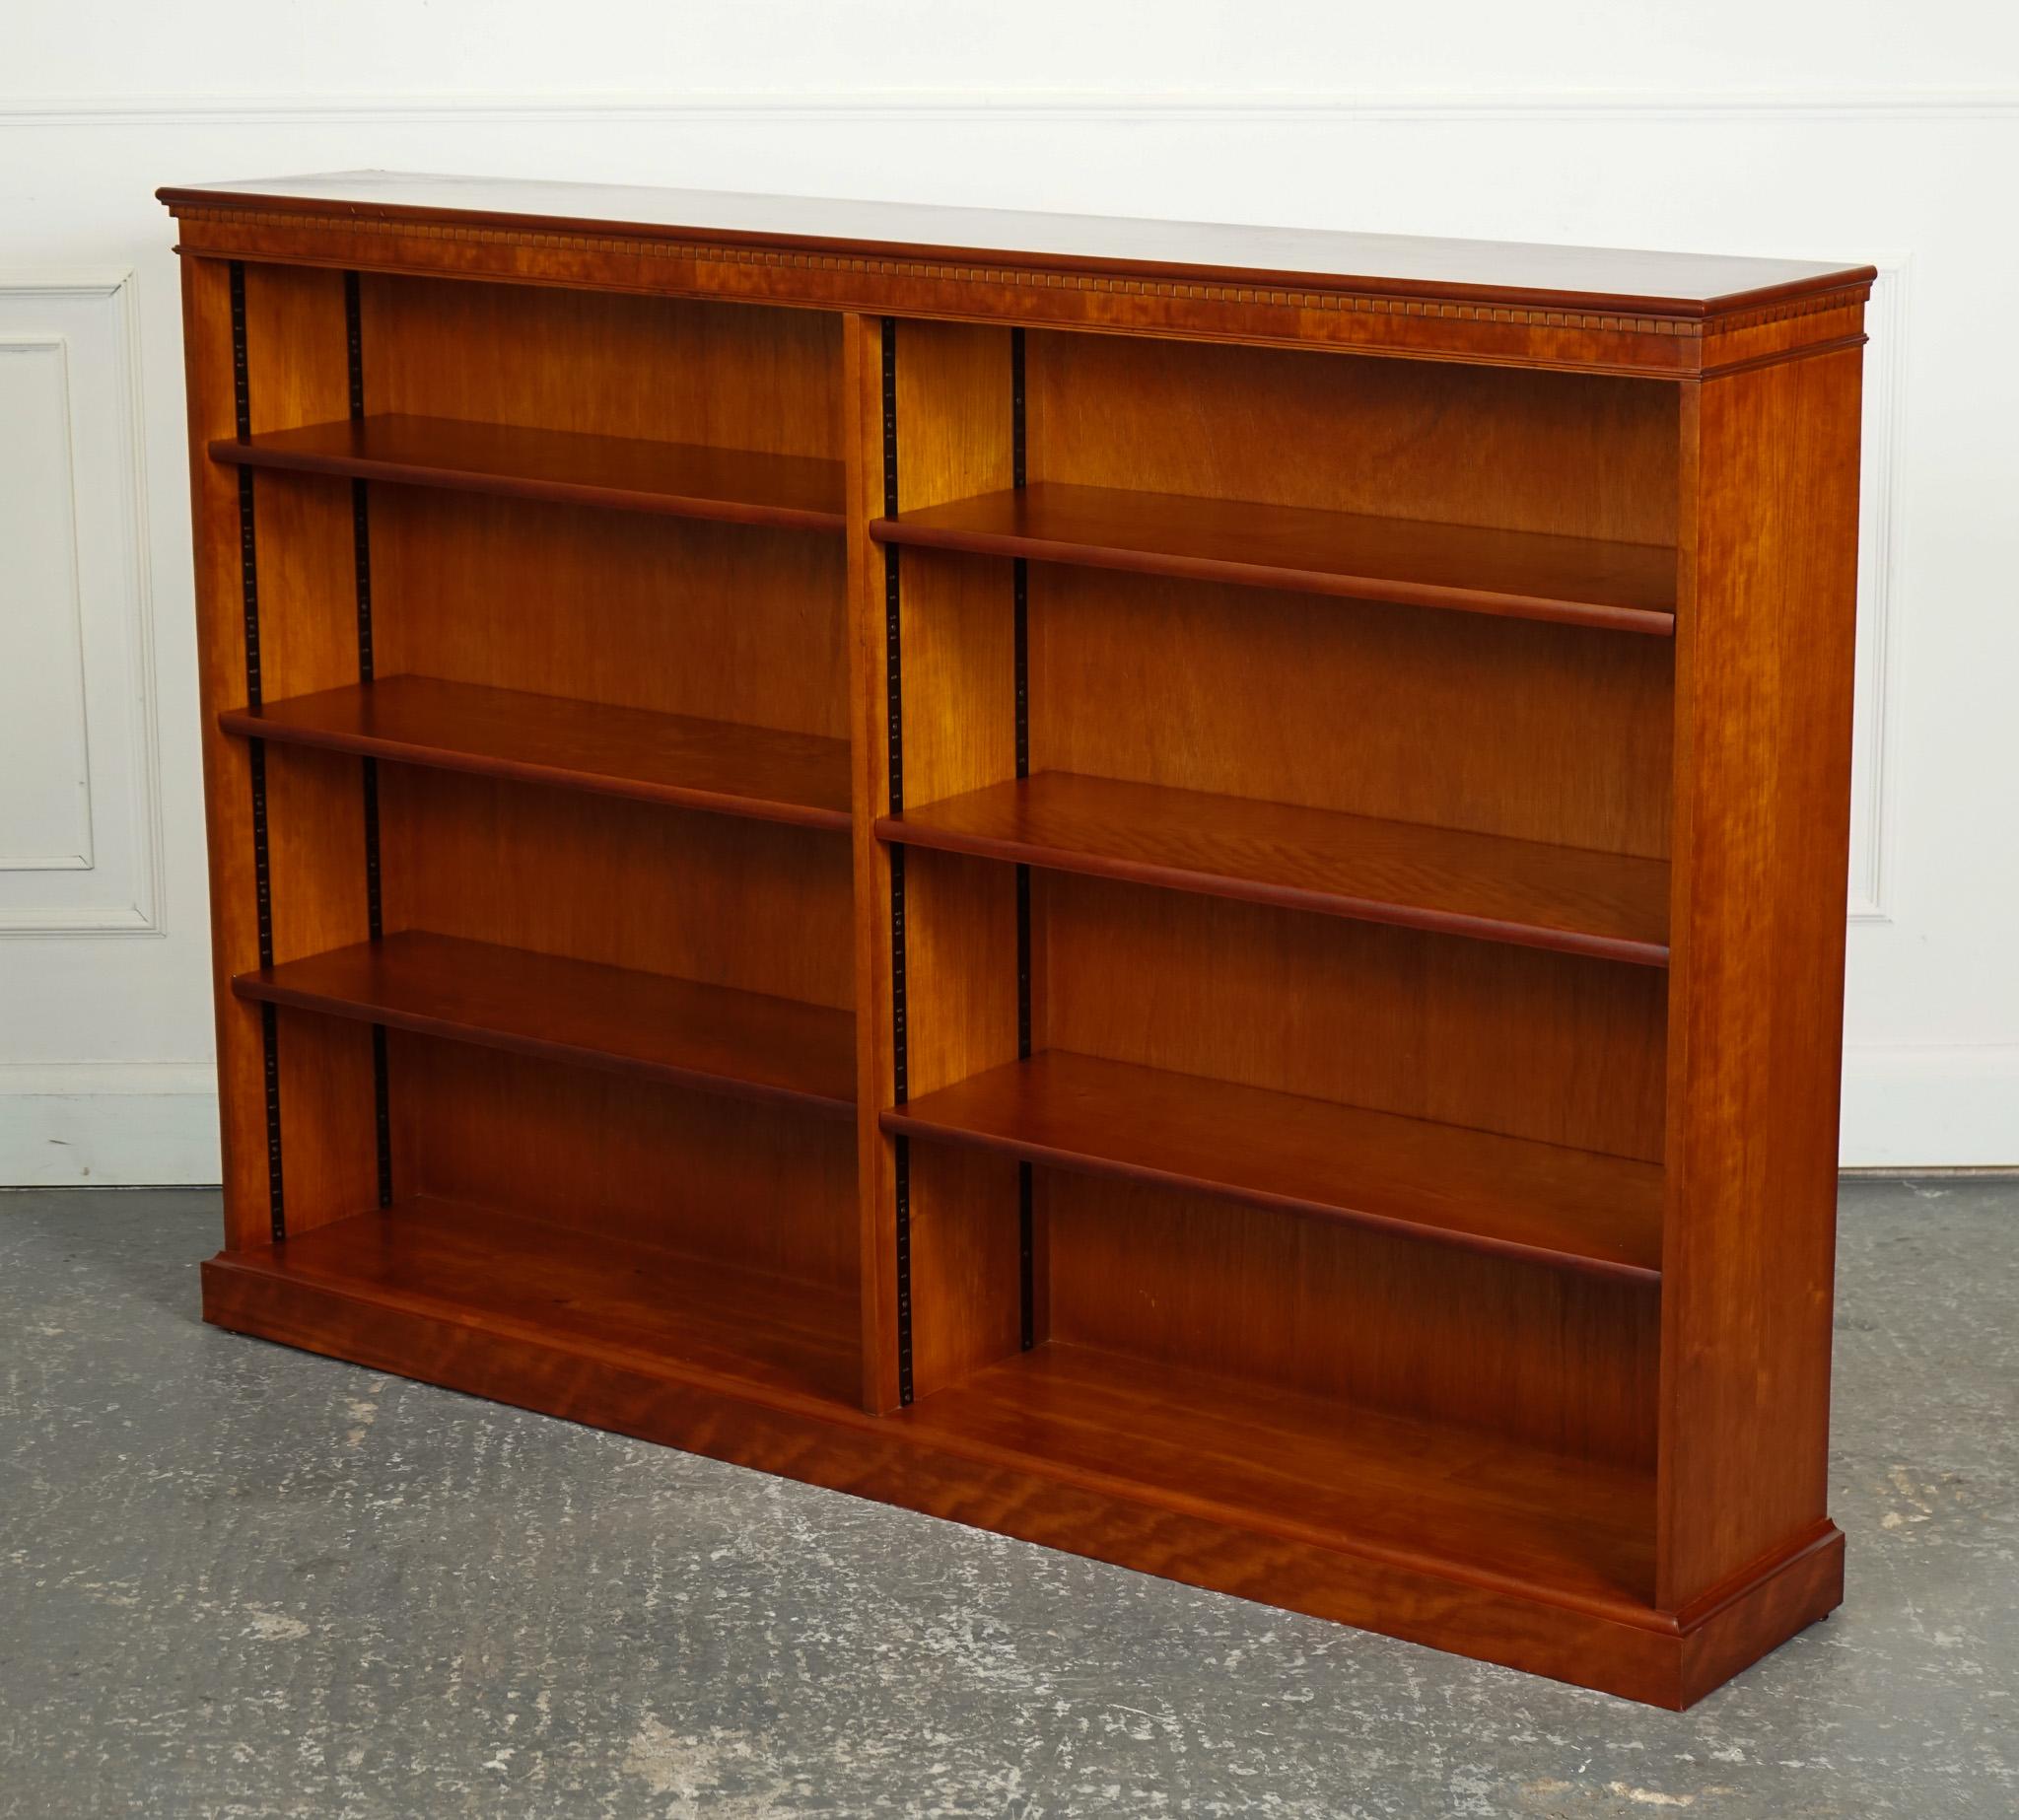 
We are delighted to offer for sale this Yew Wood Twin Low Open Bookcase With Adjustable shelves.

A vintage Yew double fronted low open bookcase with adjustable shelves is a stylish and functional piece of furniture that offers a classic design